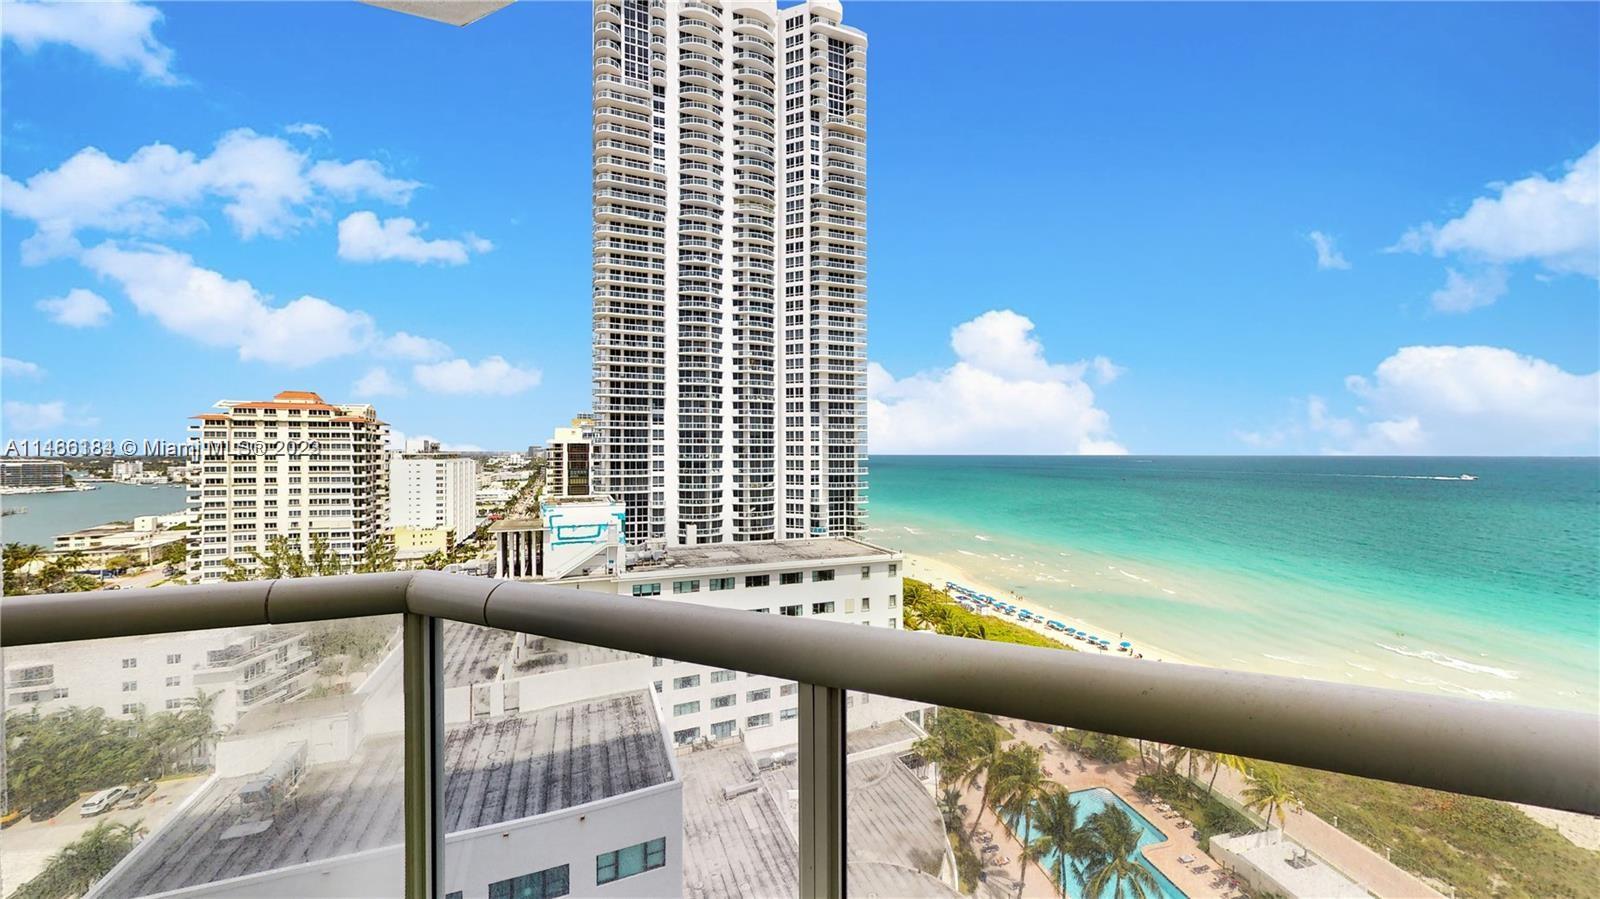 Listing Image 6301 Collins Ave #1408